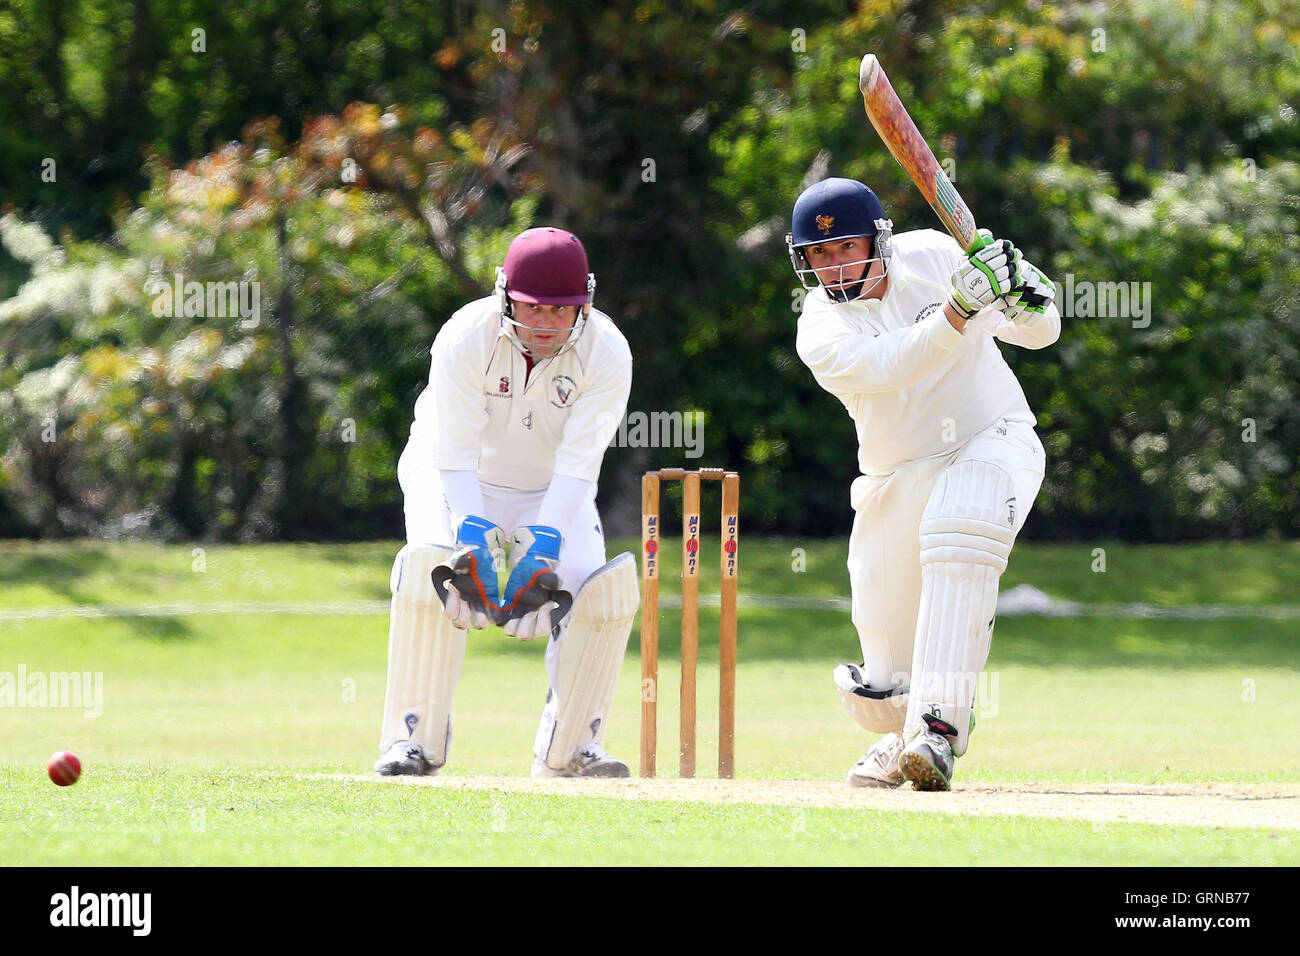 C Cook in batting action for Ardleigh Green - Fives & Heronians CC vs Ardleigh Green CC - Essex Cricket League Cup - 03/05/14 Stock Photo